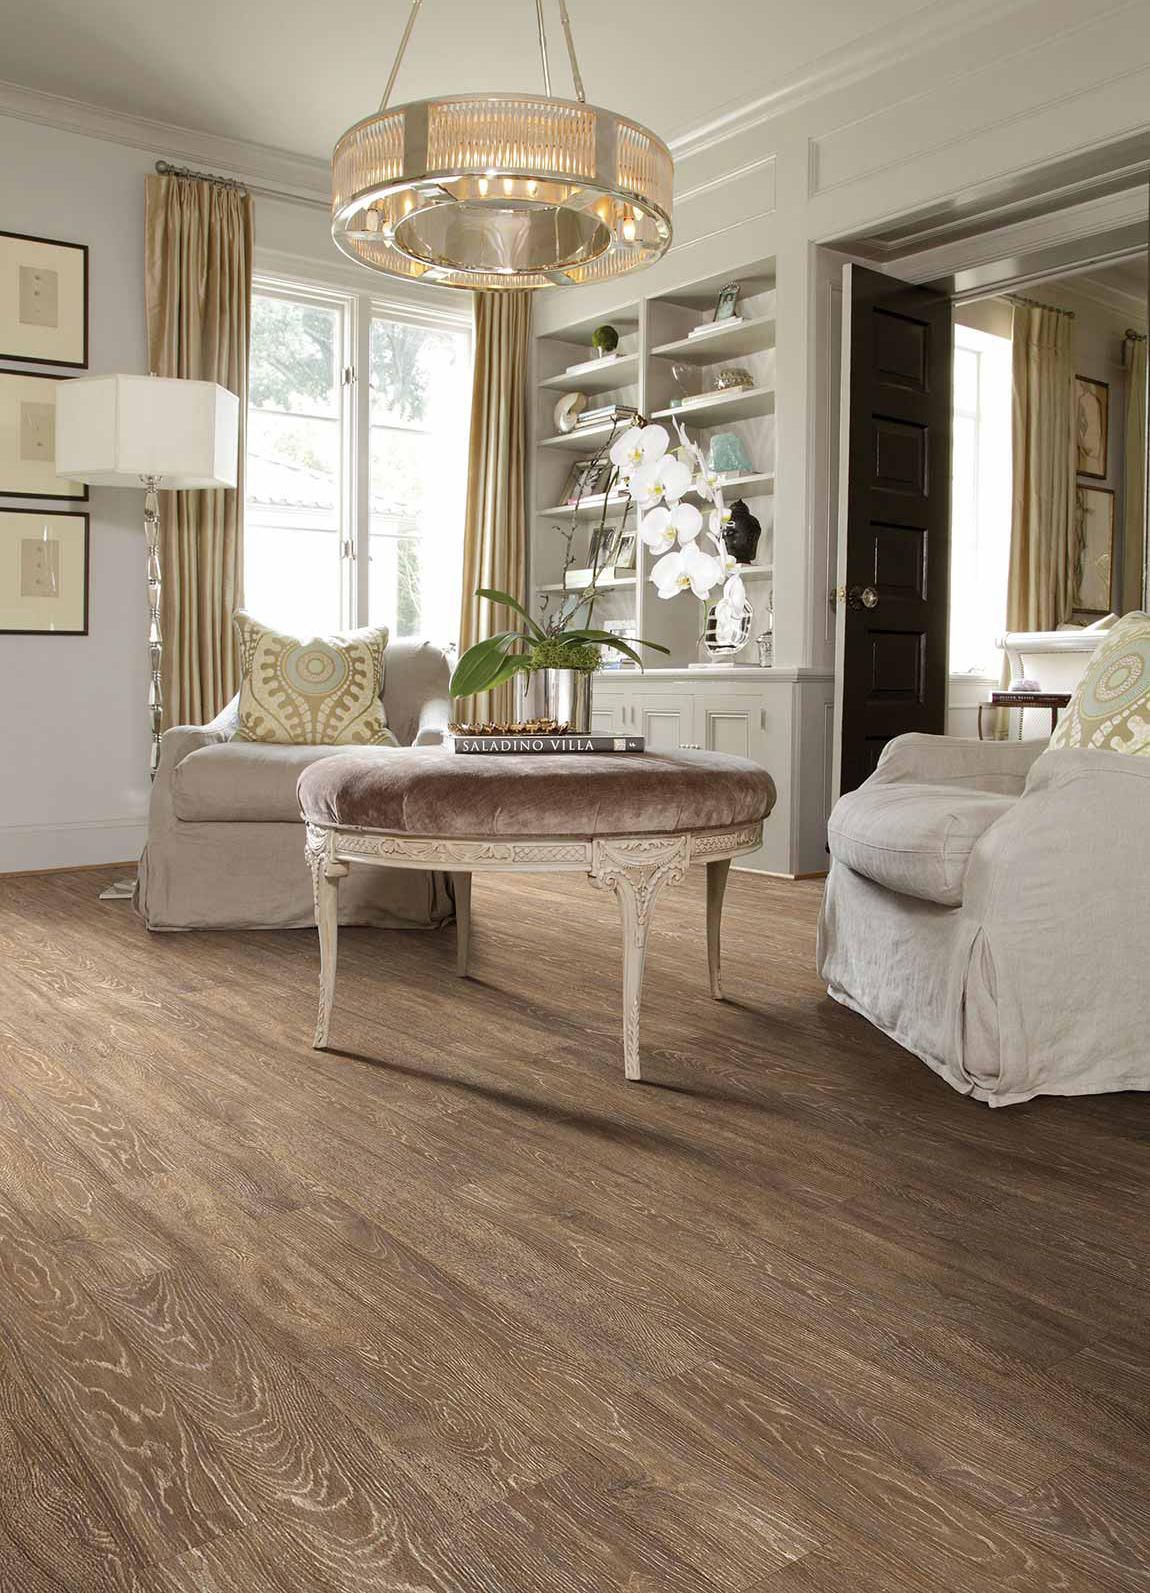 Laminate flooring design featuring oak shaded floors, white furnishings and a chandelier.